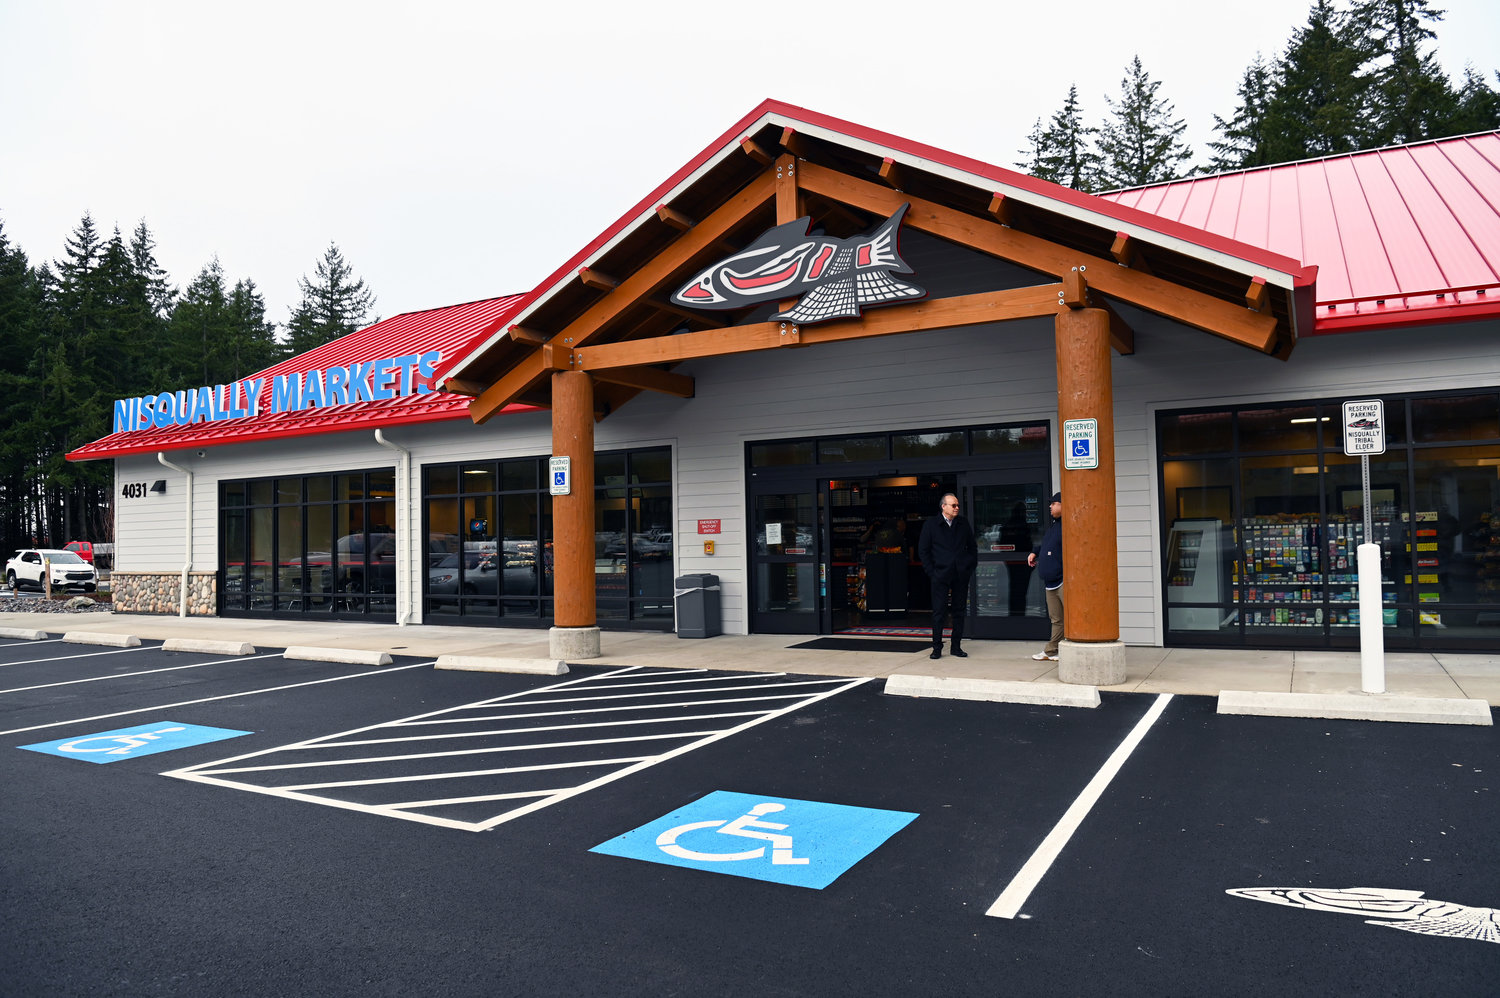 Camas Plaza is the new location of Nisqually Markets convenience store.